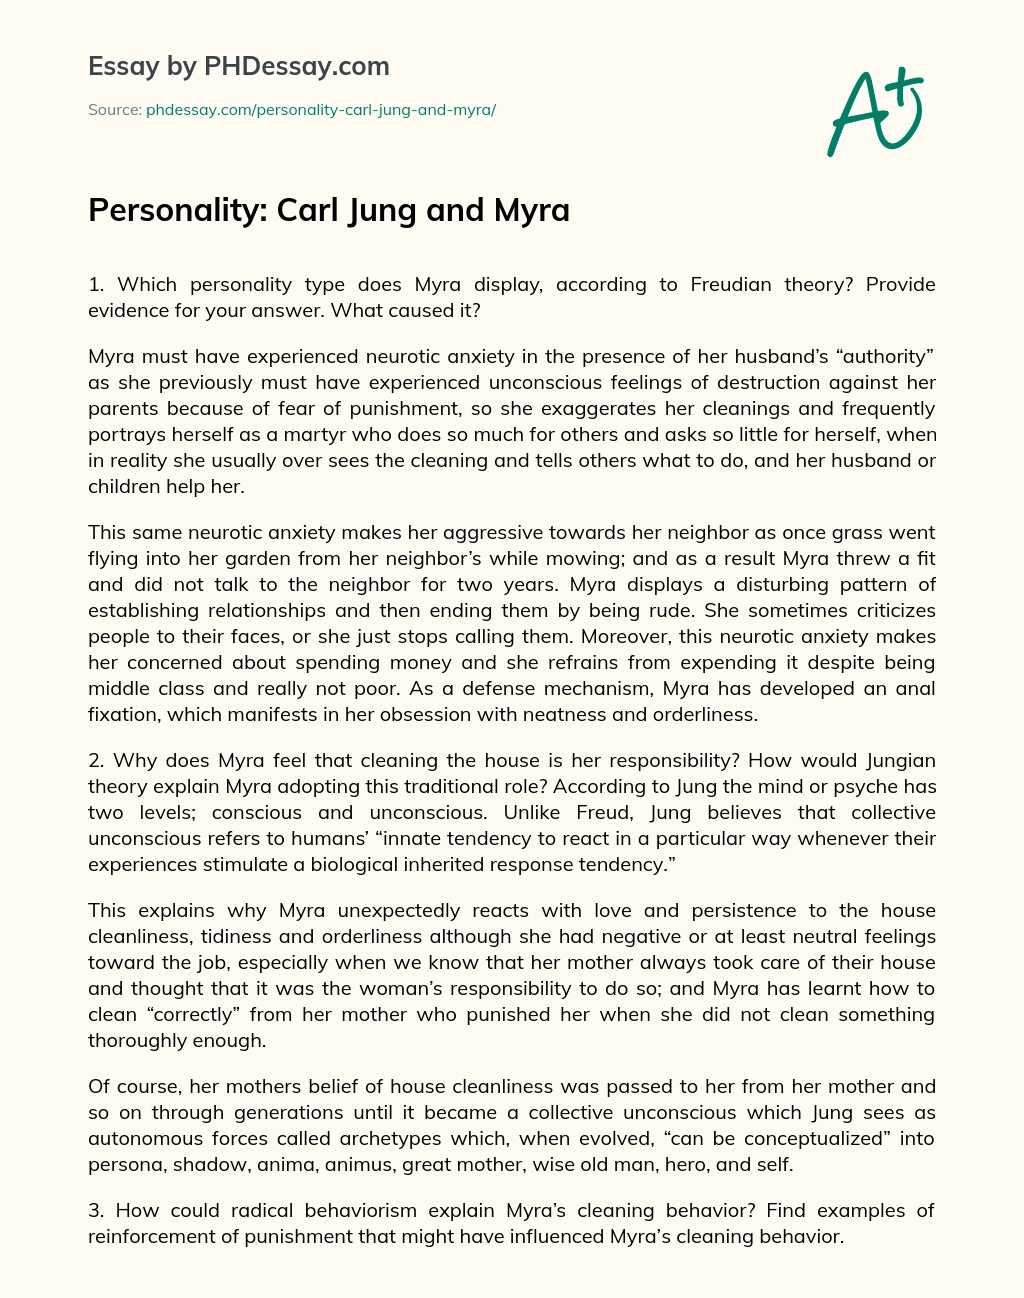 Personality: Carl Jung and Myra essay